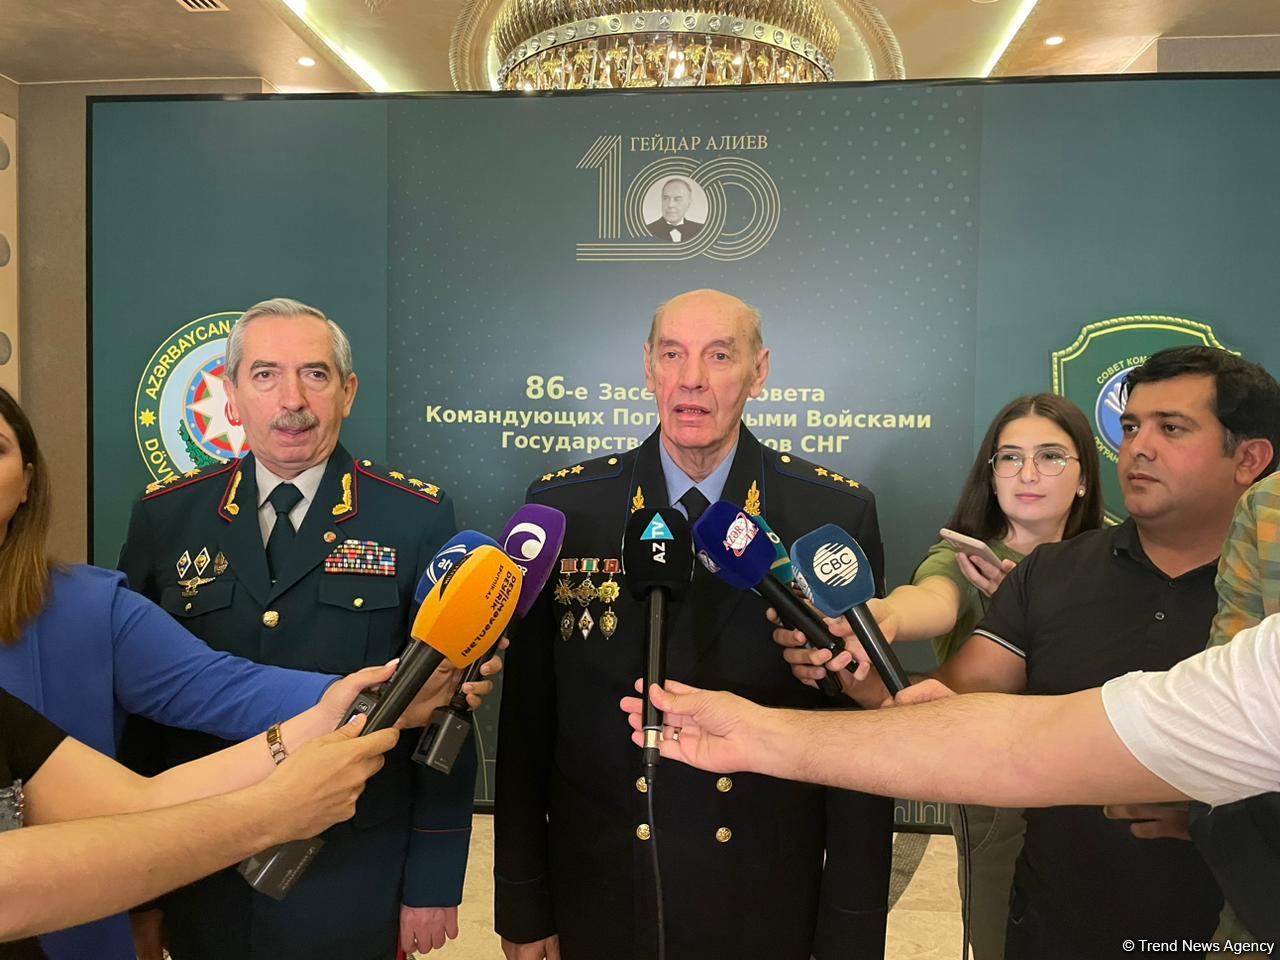 CIS Council of Commanders of Border Troops working on two new documents - deputy chairman